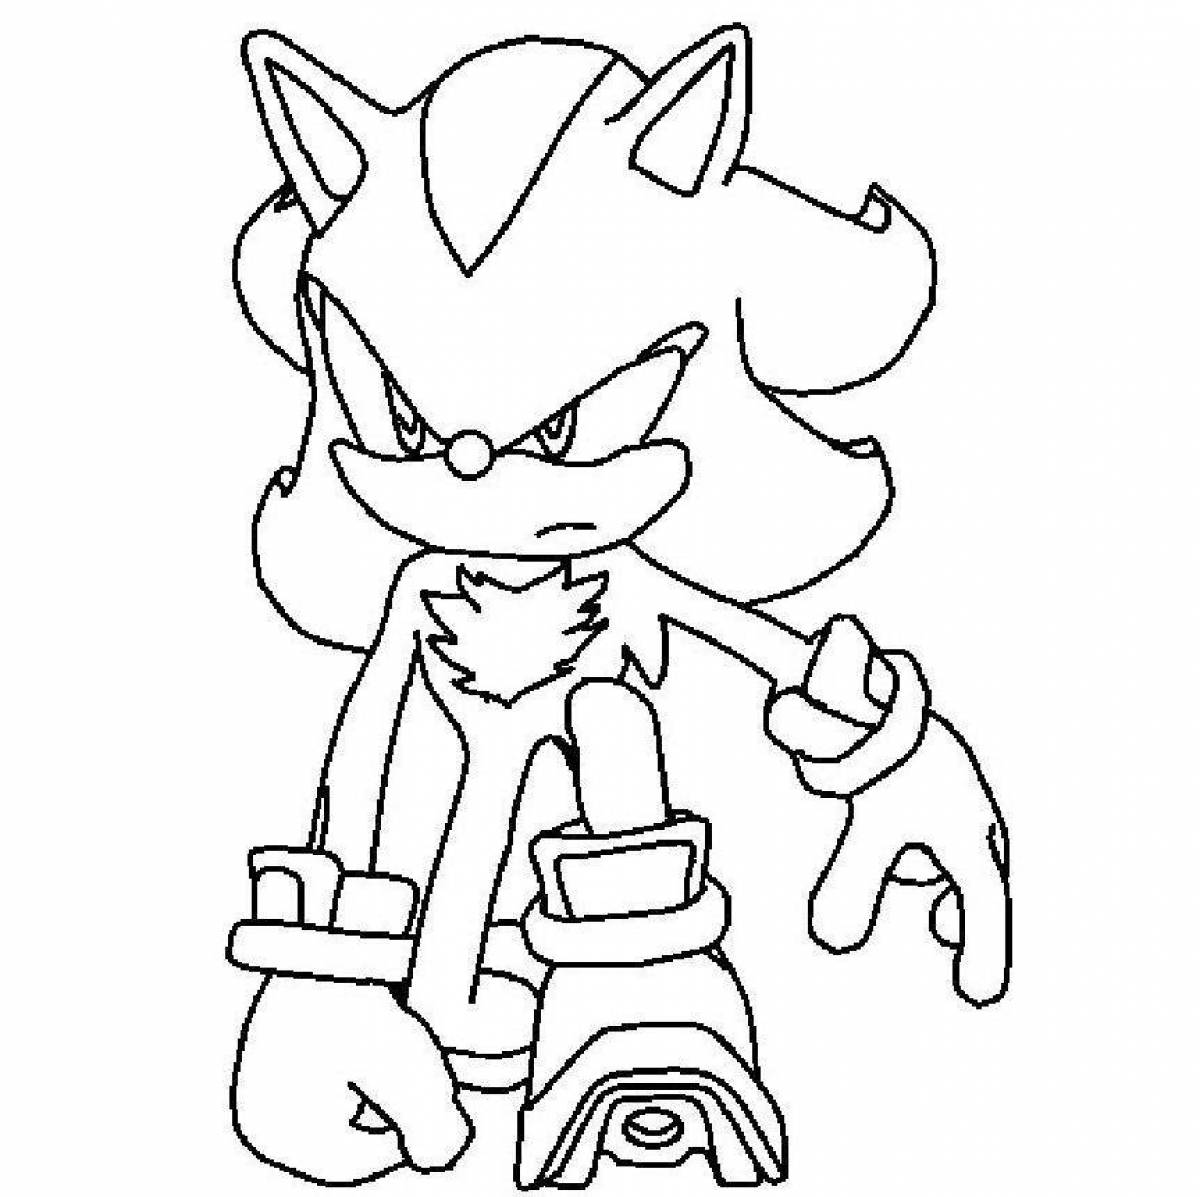 Radiant sonic shadow coloring page